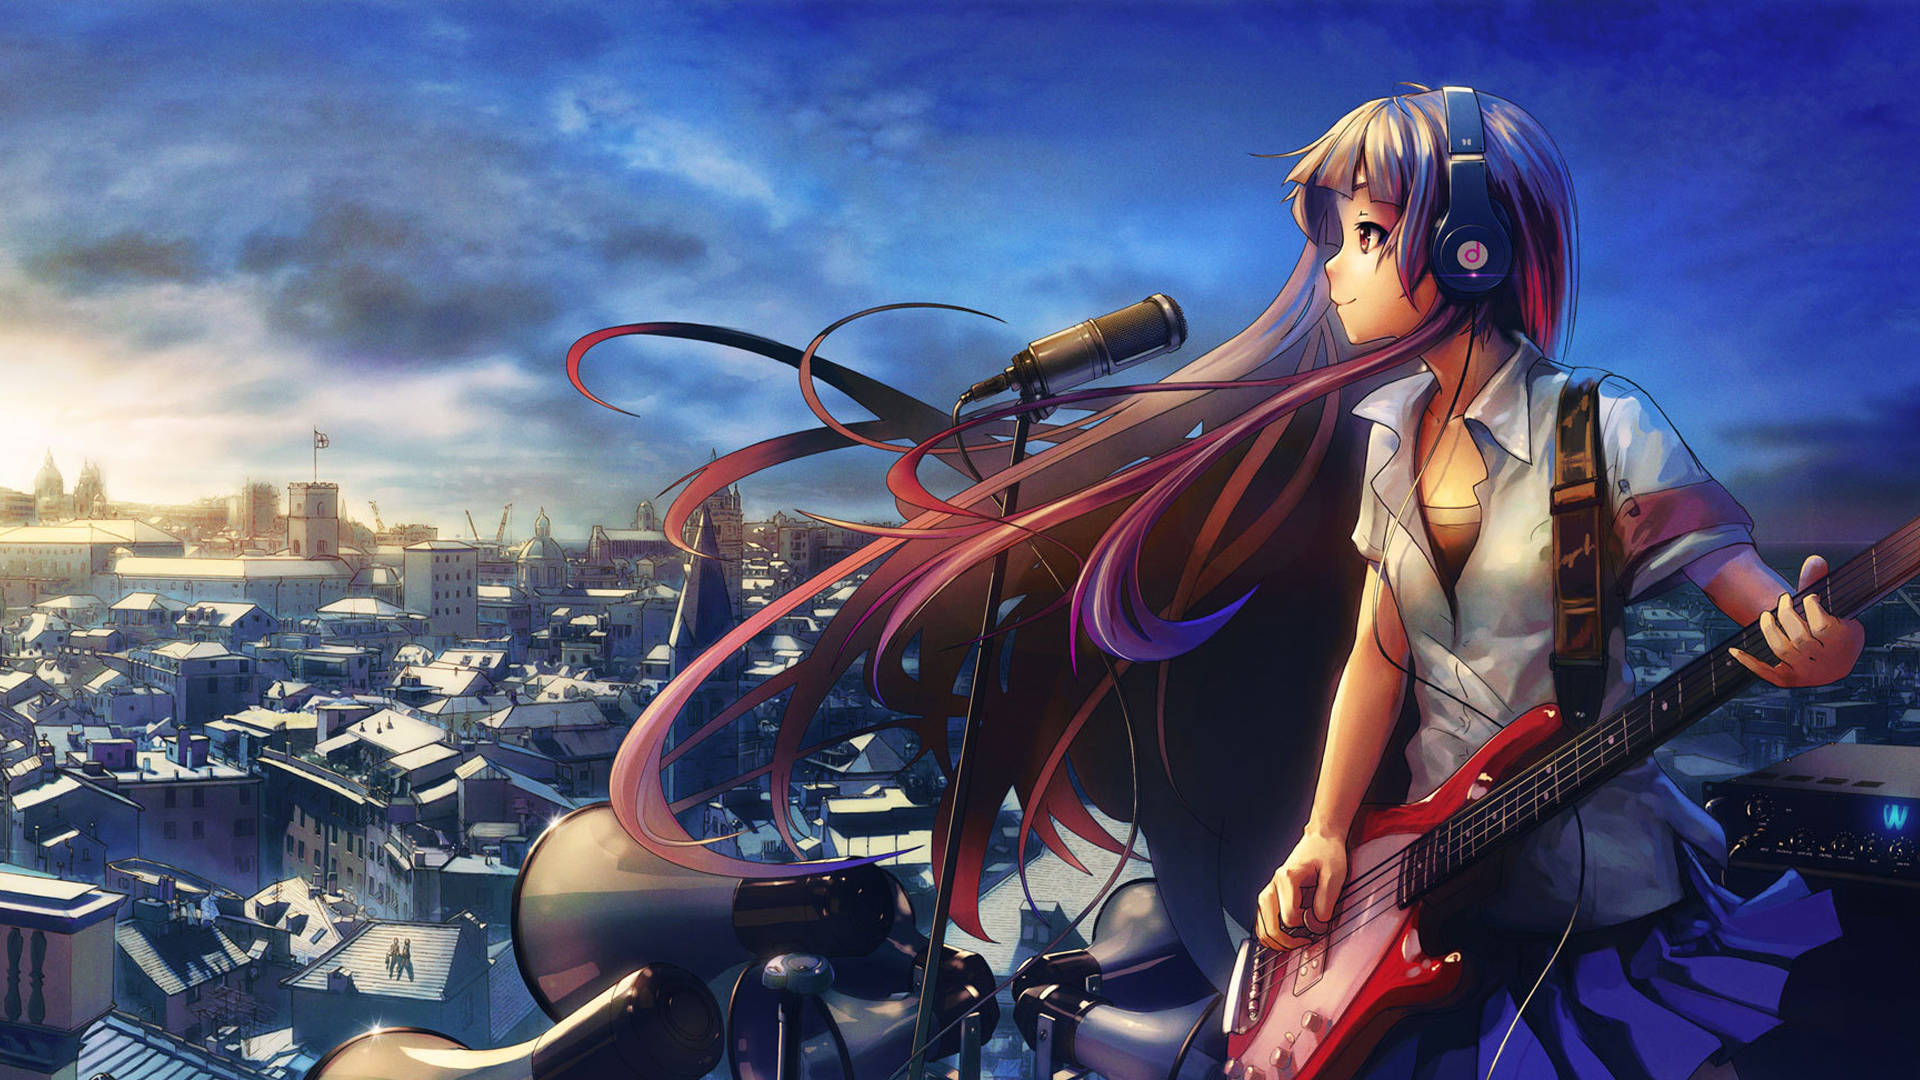 1920x1080 Full Hd Anime Girl Playing Guitar On Rooftop Background